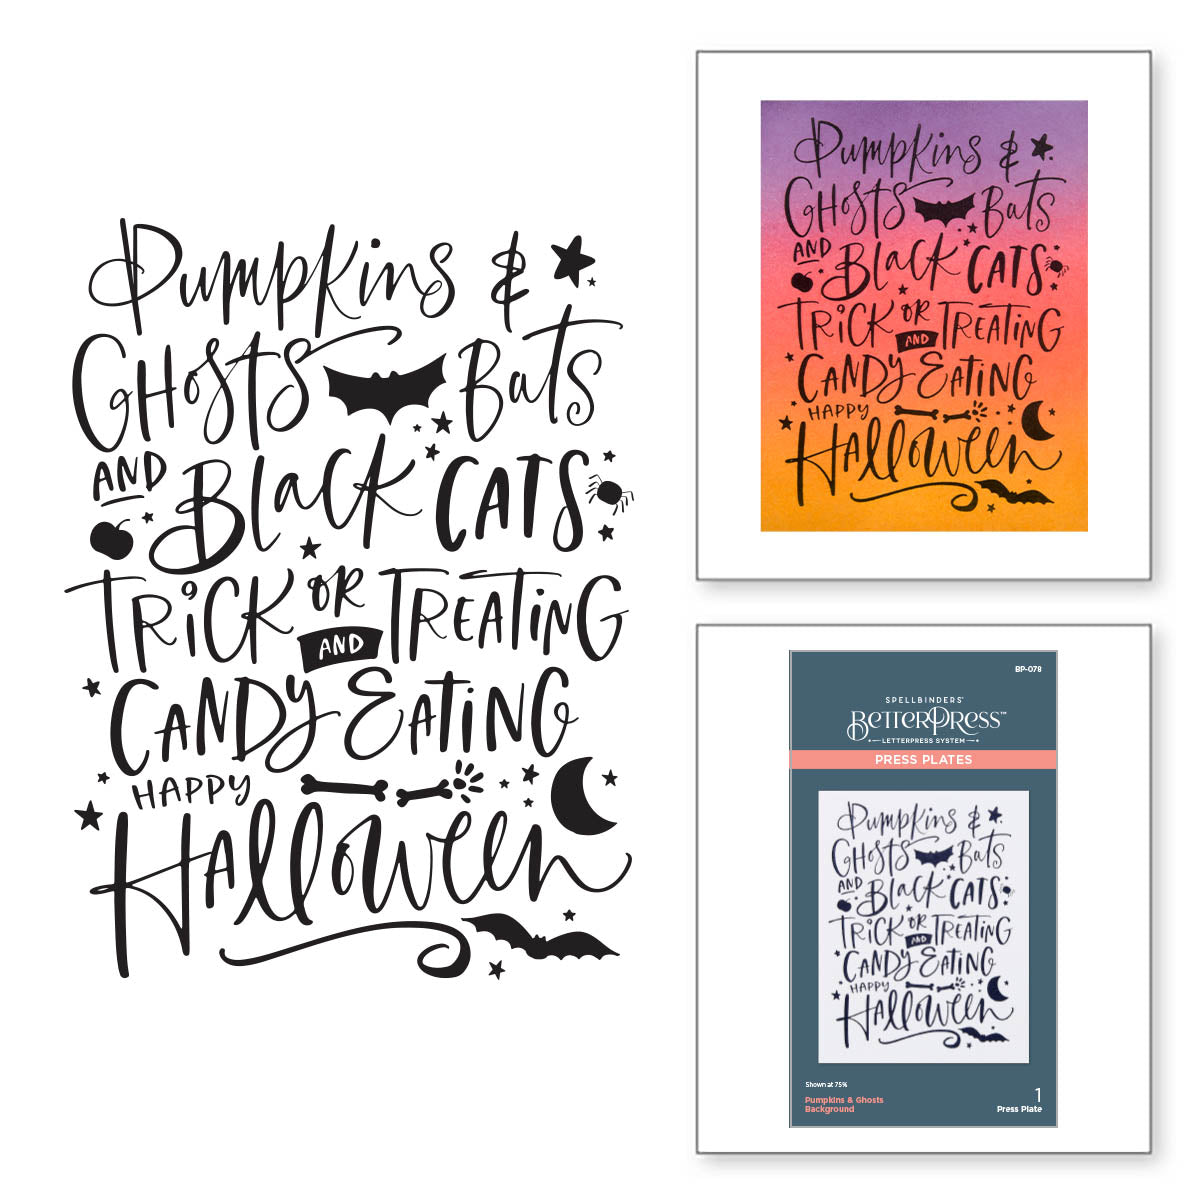 Pumpkins & Ghosts Background Press Plates from the Betterpress Halloween Collection